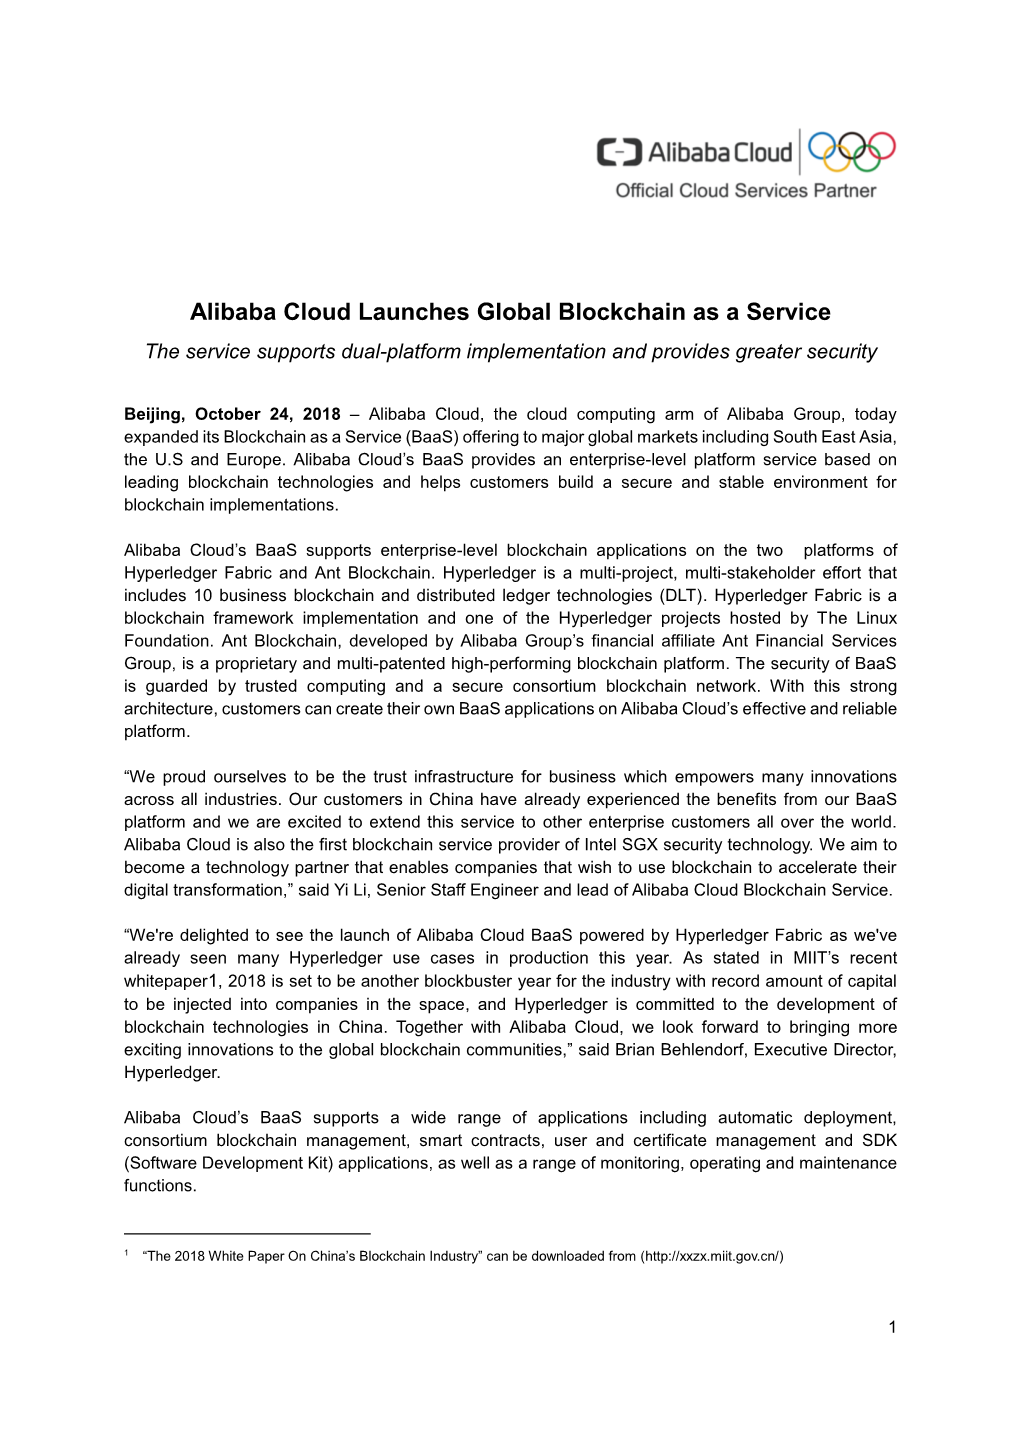 Alibaba Cloud Launches Global Blockchain As a Service the Service Supports Dual-Platform Implementation and Provides Greater Security